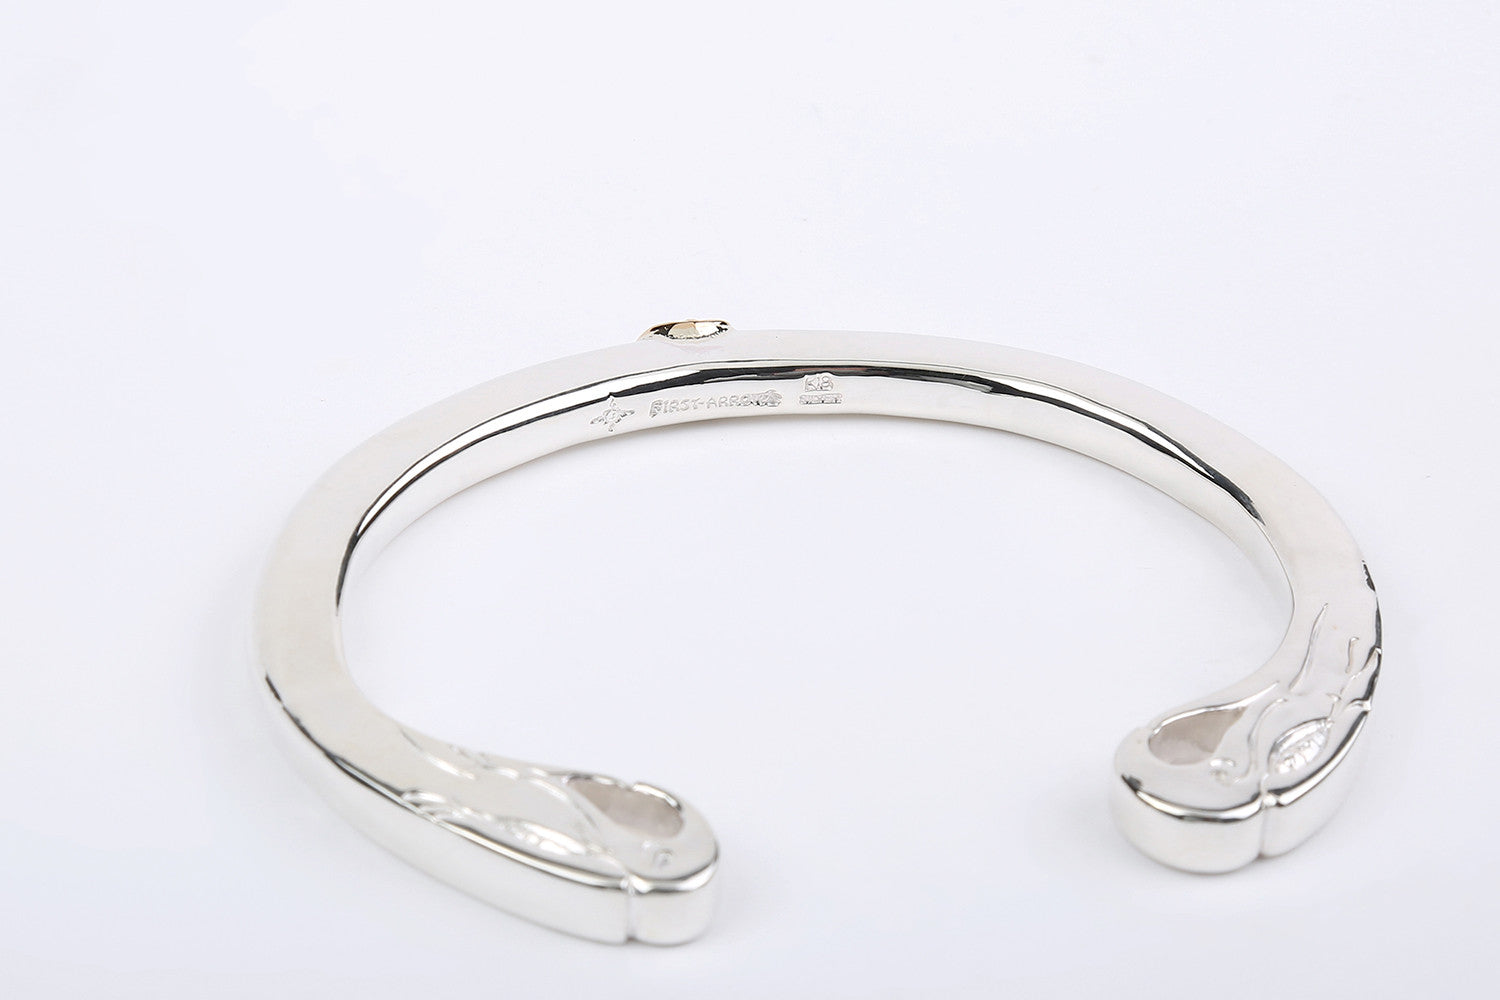 First Arrow's "Double Eagle's Head" Bangle With 18K Gold Emblem (BR-195)